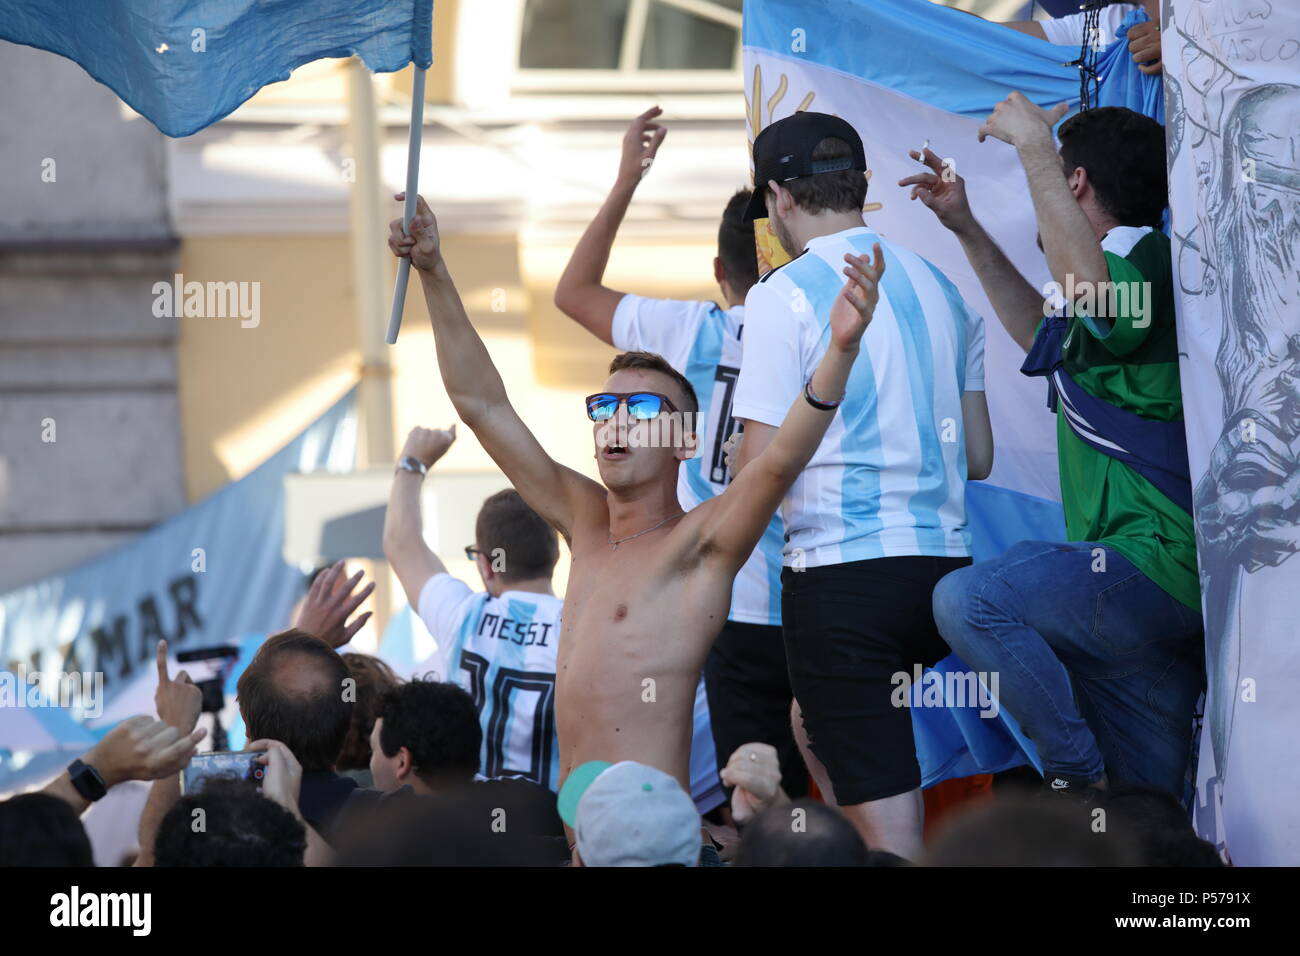 St. Petersburg, Russia, 25th June, 2018. Crowd of Argentinian football fans at Solo Sokos Palace Bridge hotel in Saint-Petersburg where national team player Lionel Messi is stayed, on the day before FIFA World Cup 2018 match Argentina vs Nigeria. The match will be held on Saint Petersburg stadium and will determine whether Argentina will pass into the knockout stage Credit: StockphotoVideo/Alamy Live News Stock Photo